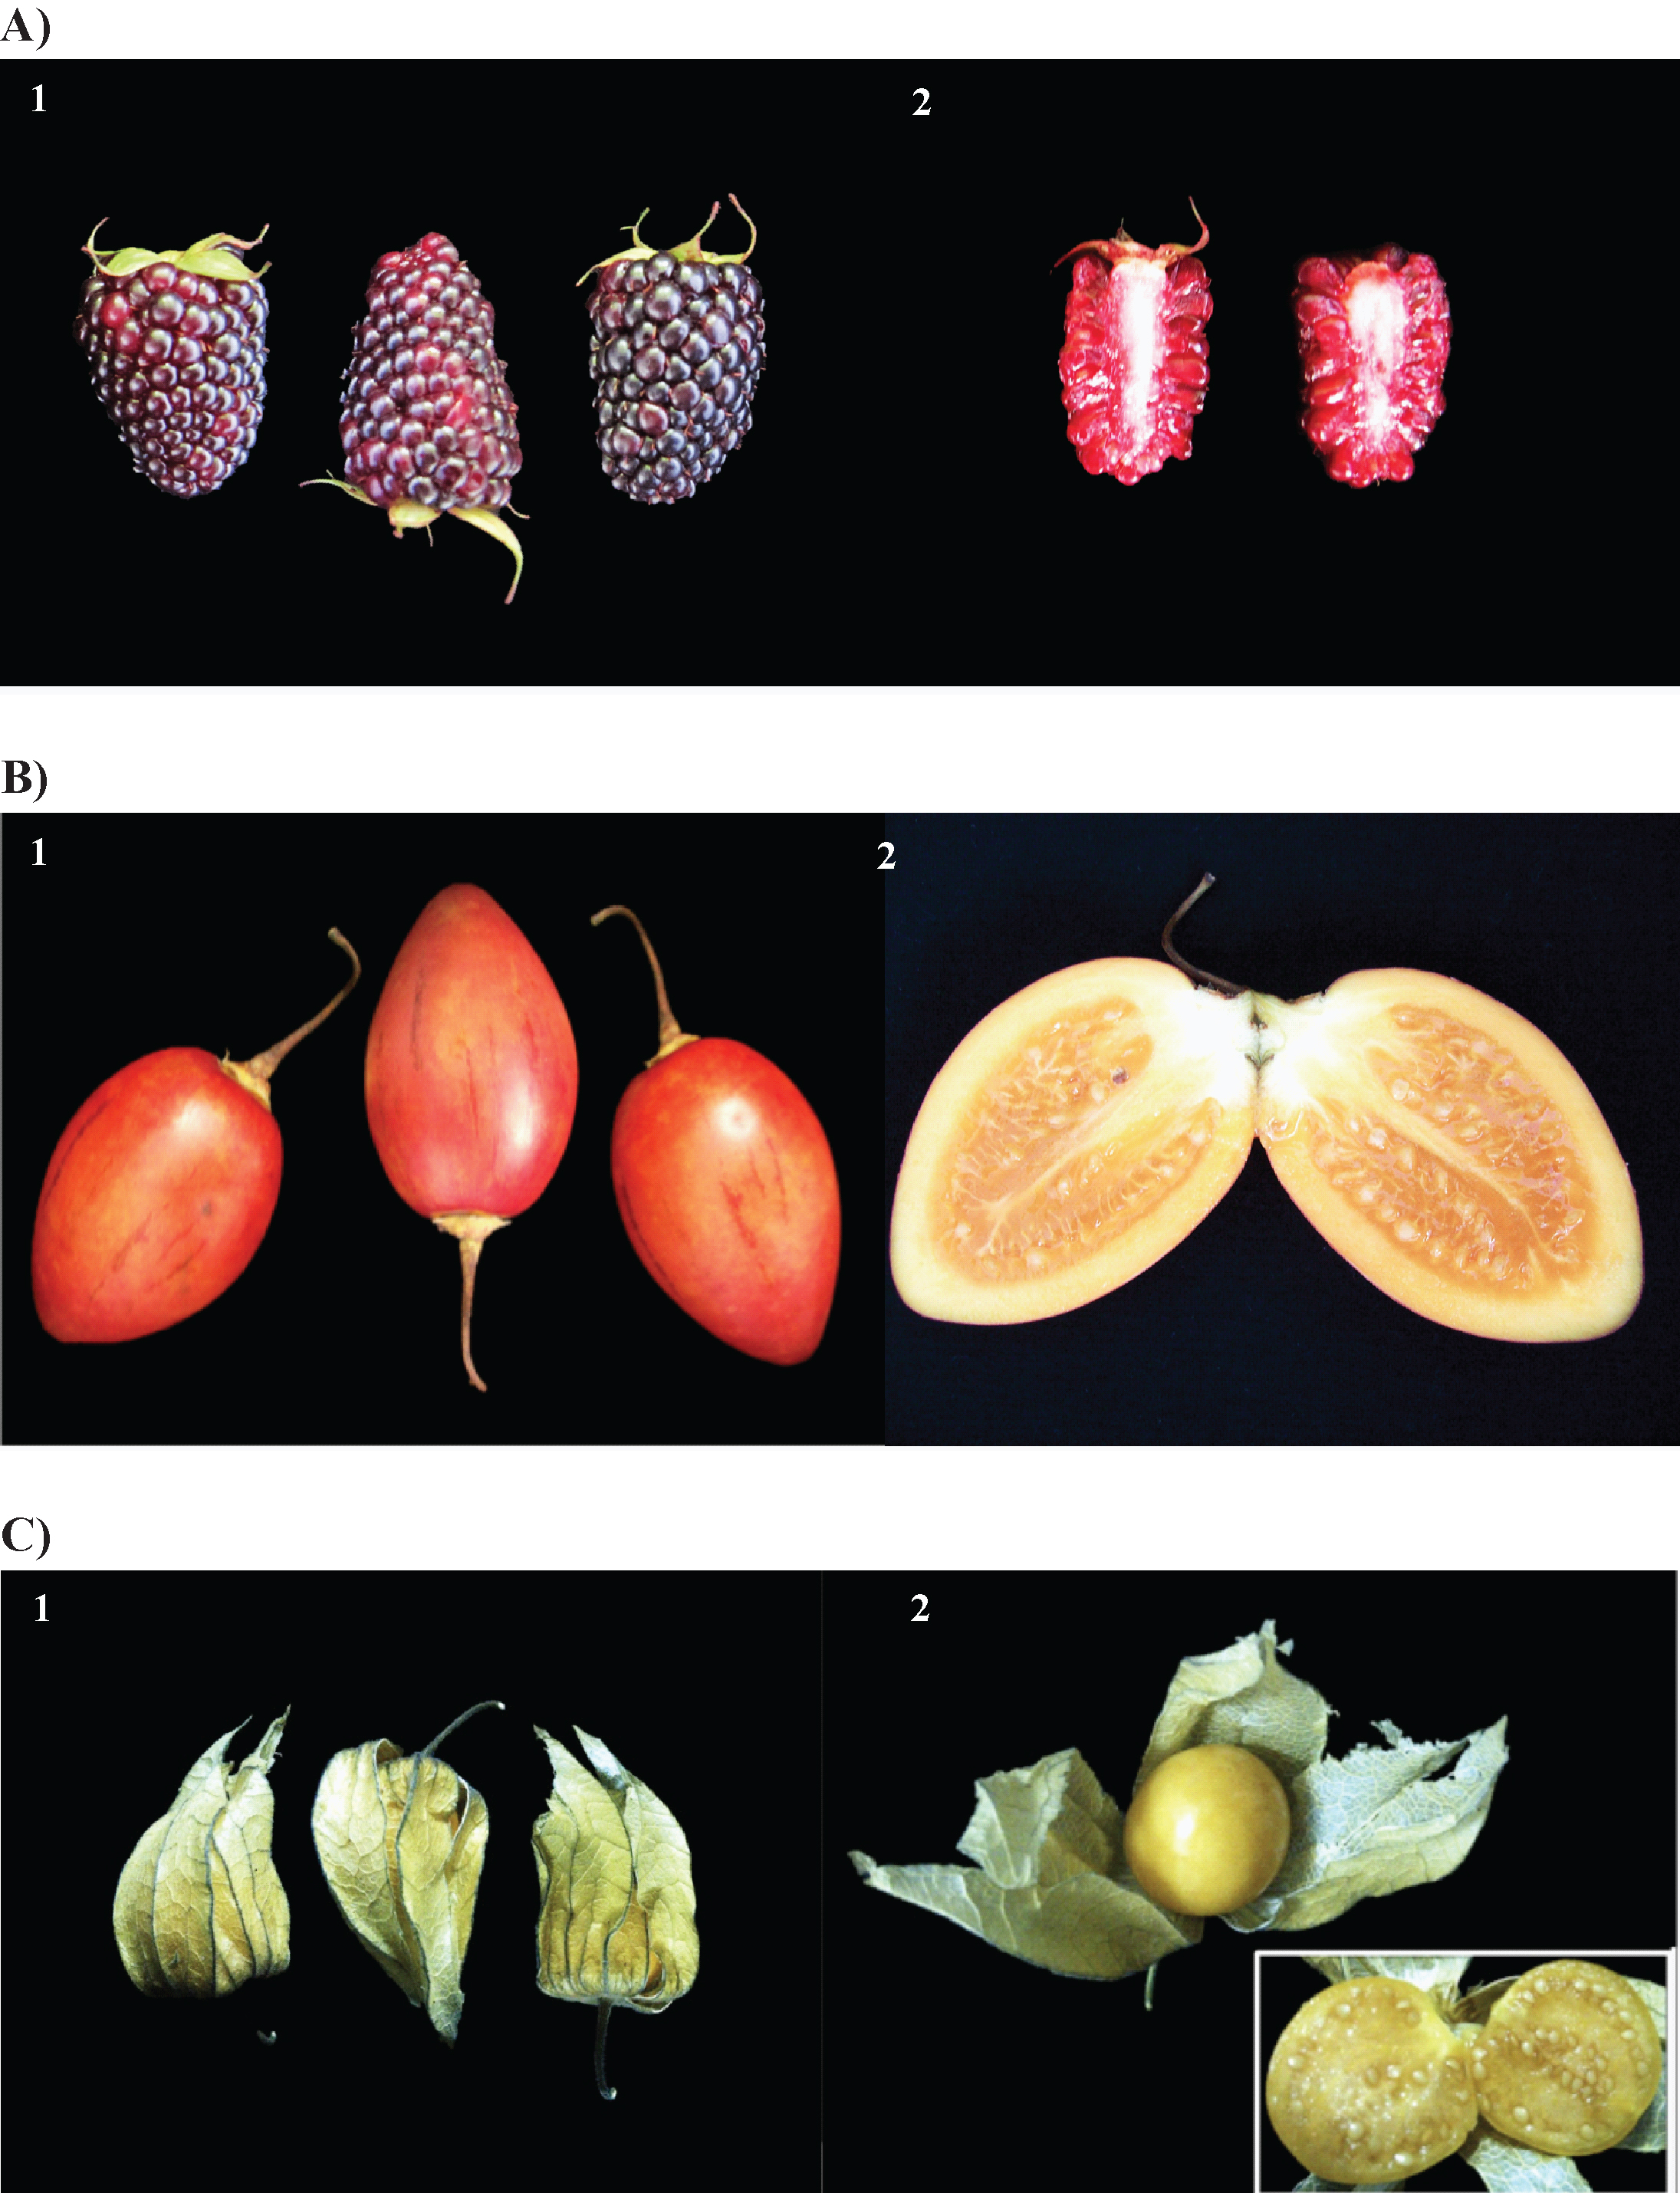 Whole (1) and halved (2) Rubus glaucus (A), Solanum betaceum (B) and Physalis peruviana (C) fruits.